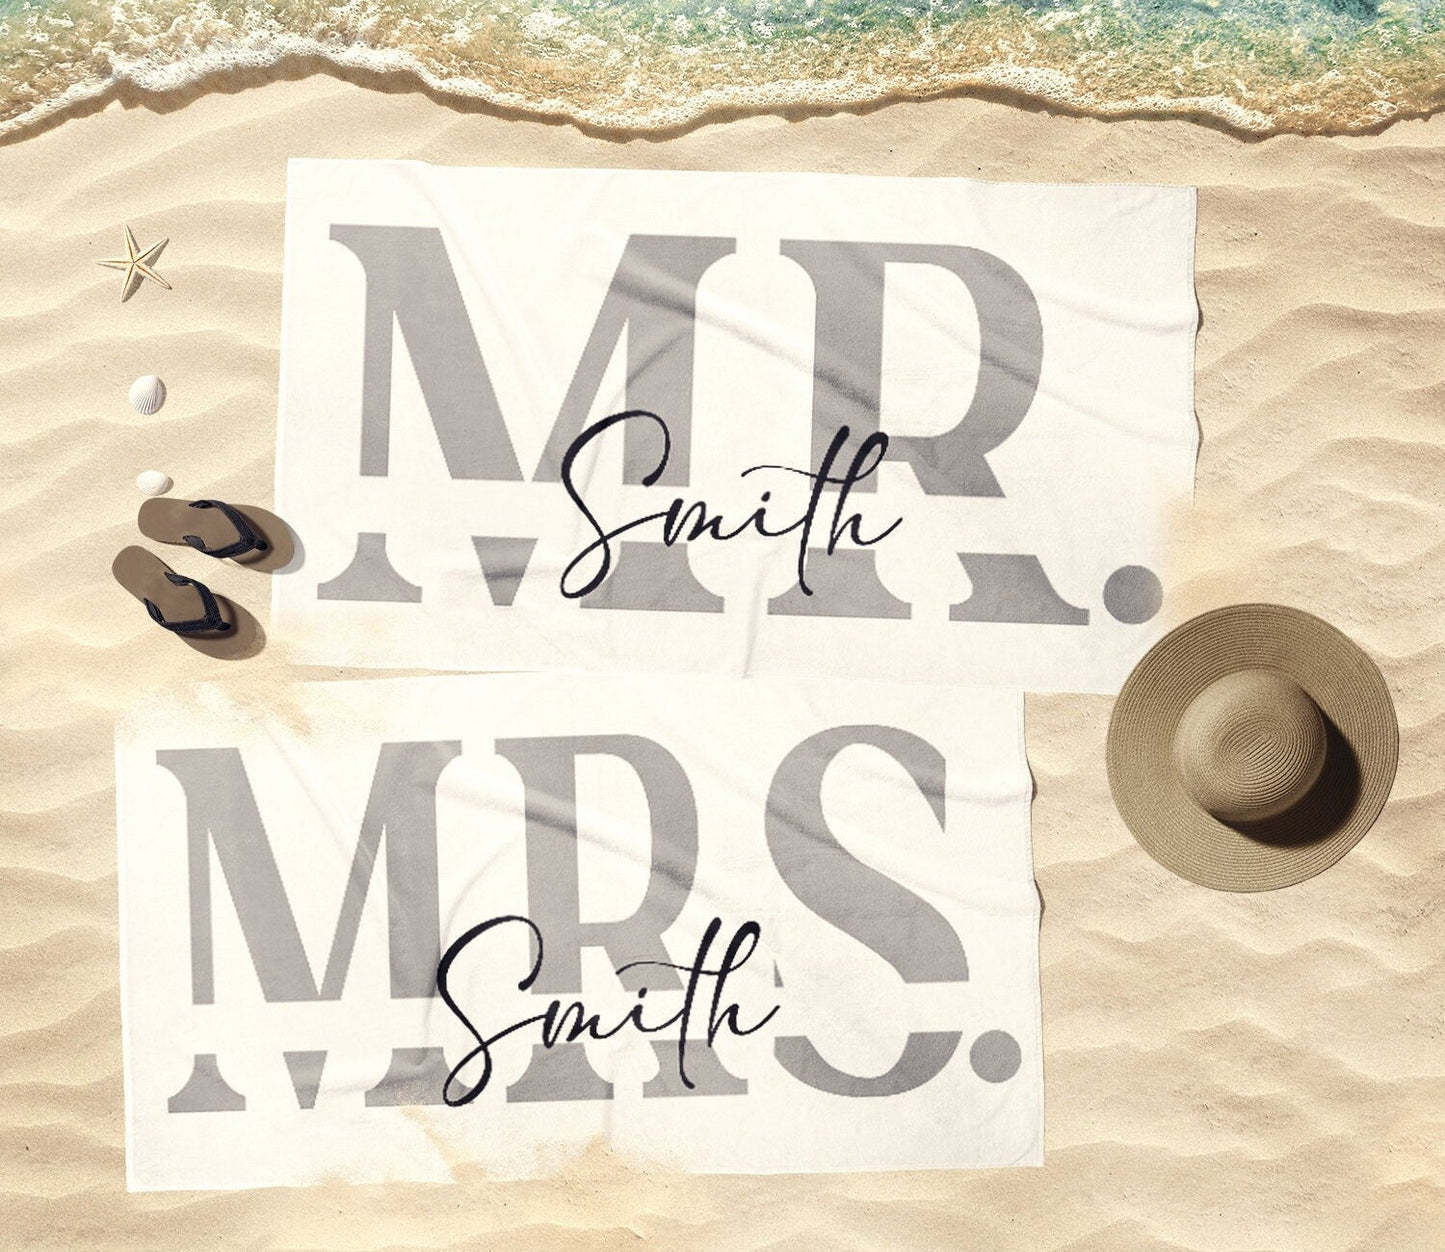 1pcs New Design - Mr or Mrs Beach Personalized Beach Towels, Honeymoon Gift, His and Hers Newlywed Gift, Personalized Wedding Gift